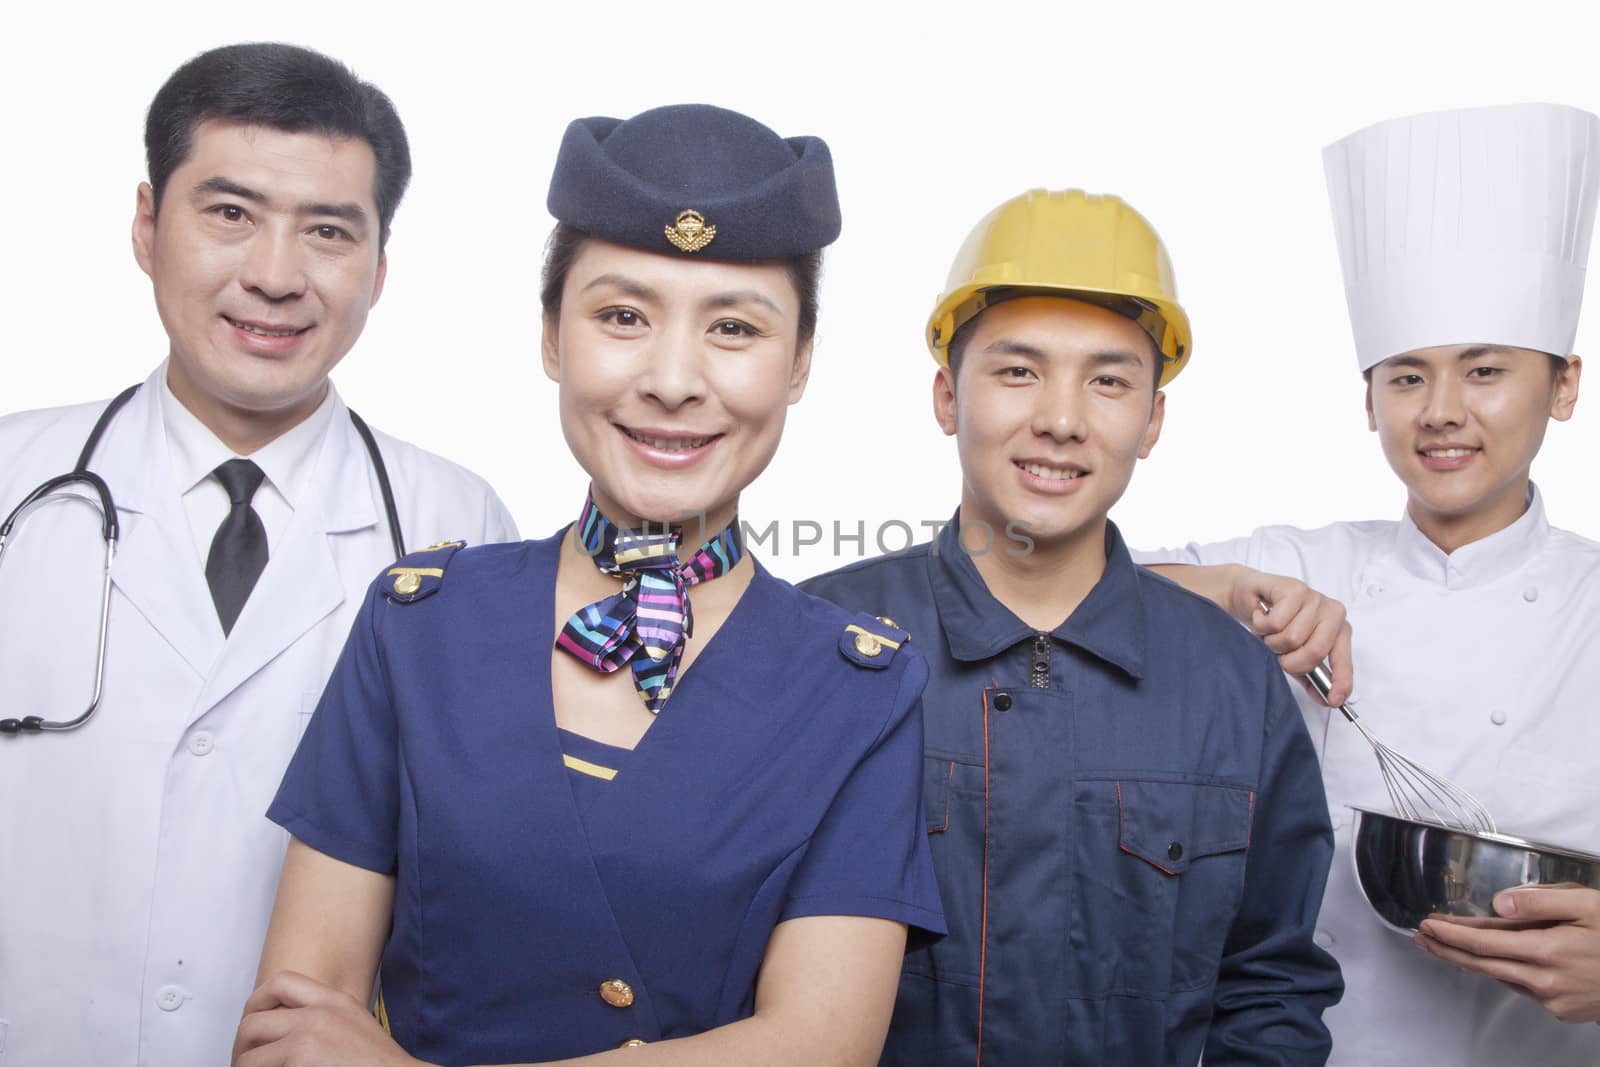 Portrait of Doctor, Air Stewardess, Construction Worker, and Chef- Studio Shot